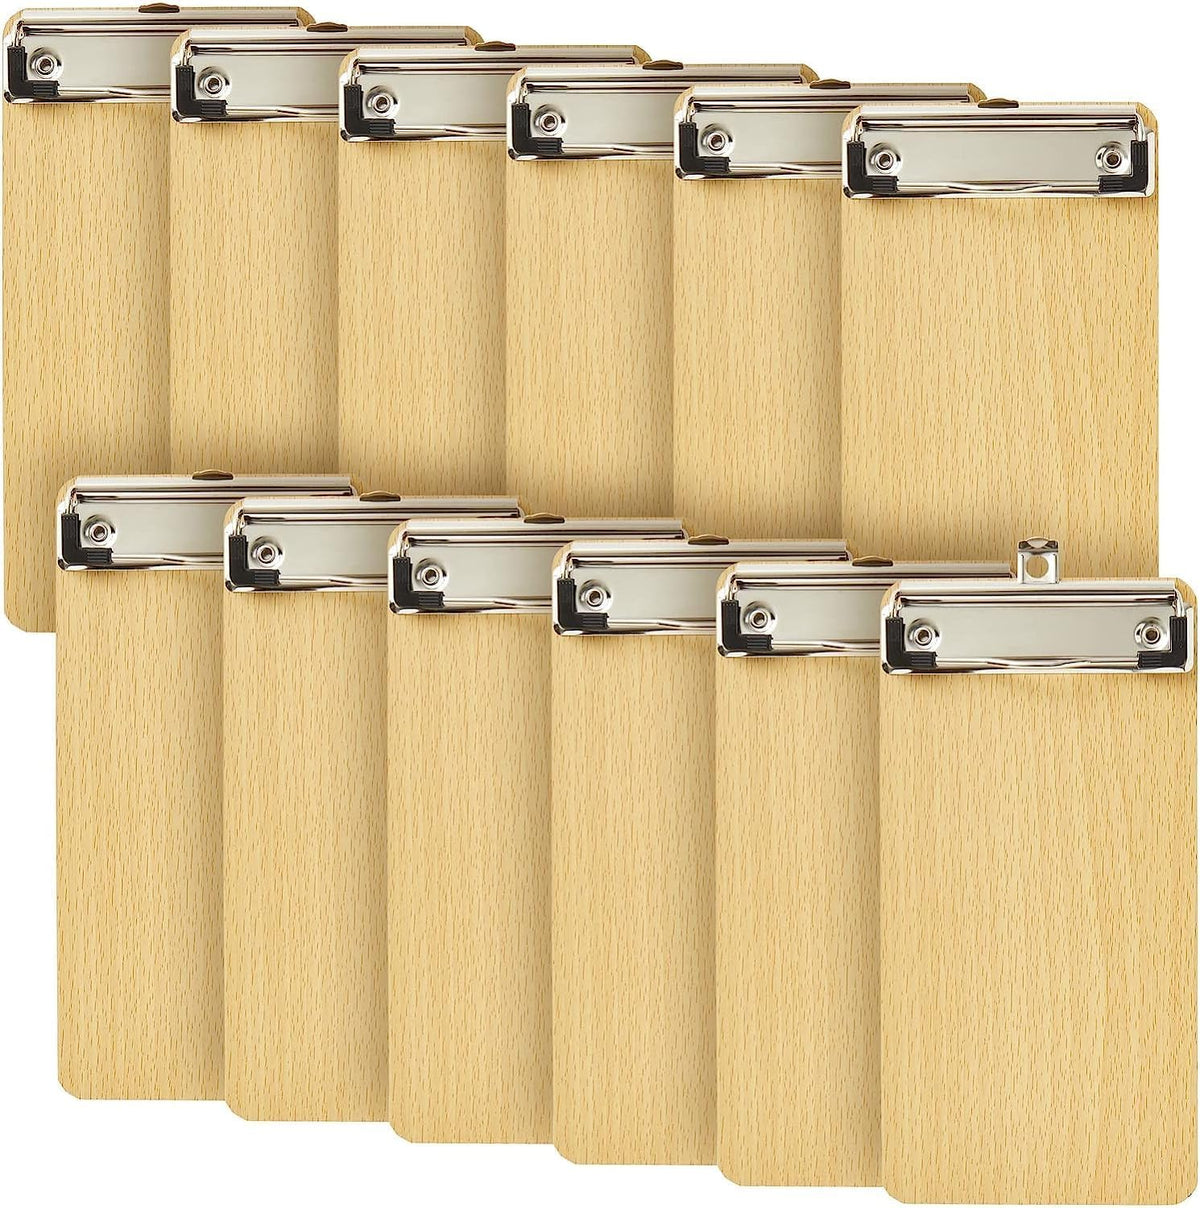 XSOURCE Wood Check Presenters for Restaurants(8"X 4") Pocket Sized Notepads,Mini Clipboards A6,Small Wooden Office Memo Clipboards,Card and Receipt Holder for Restaurant (Light Wooden Pack of 12)